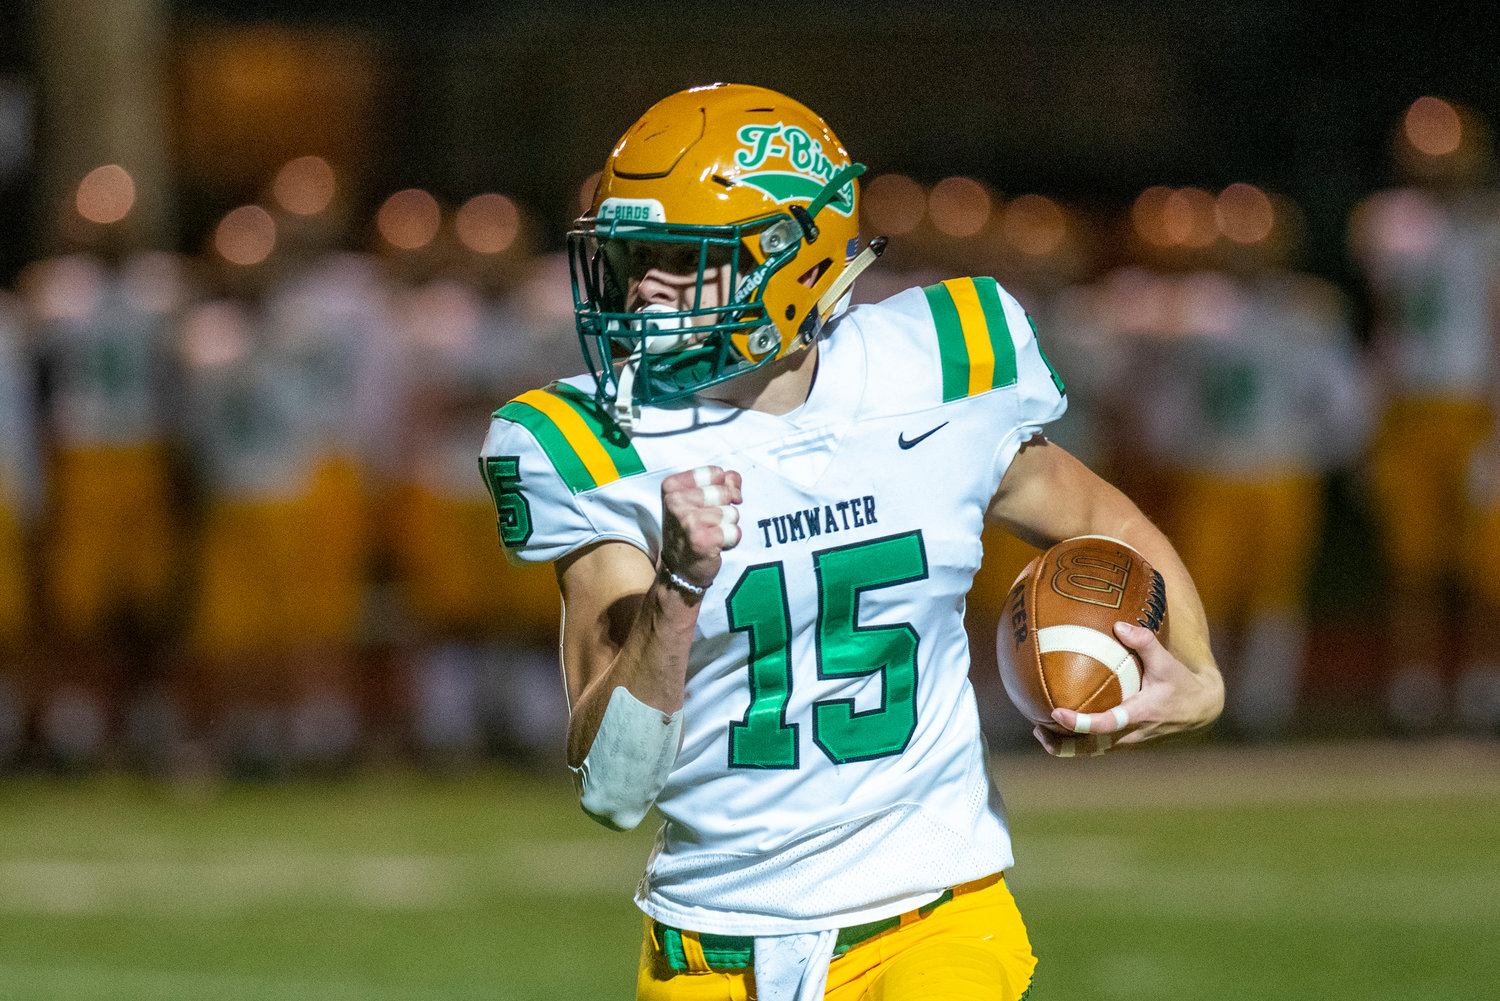 Tumwater’s Ashton Paine (15) rushes for a first-quarter touchdown against Centralia Oct. 29.